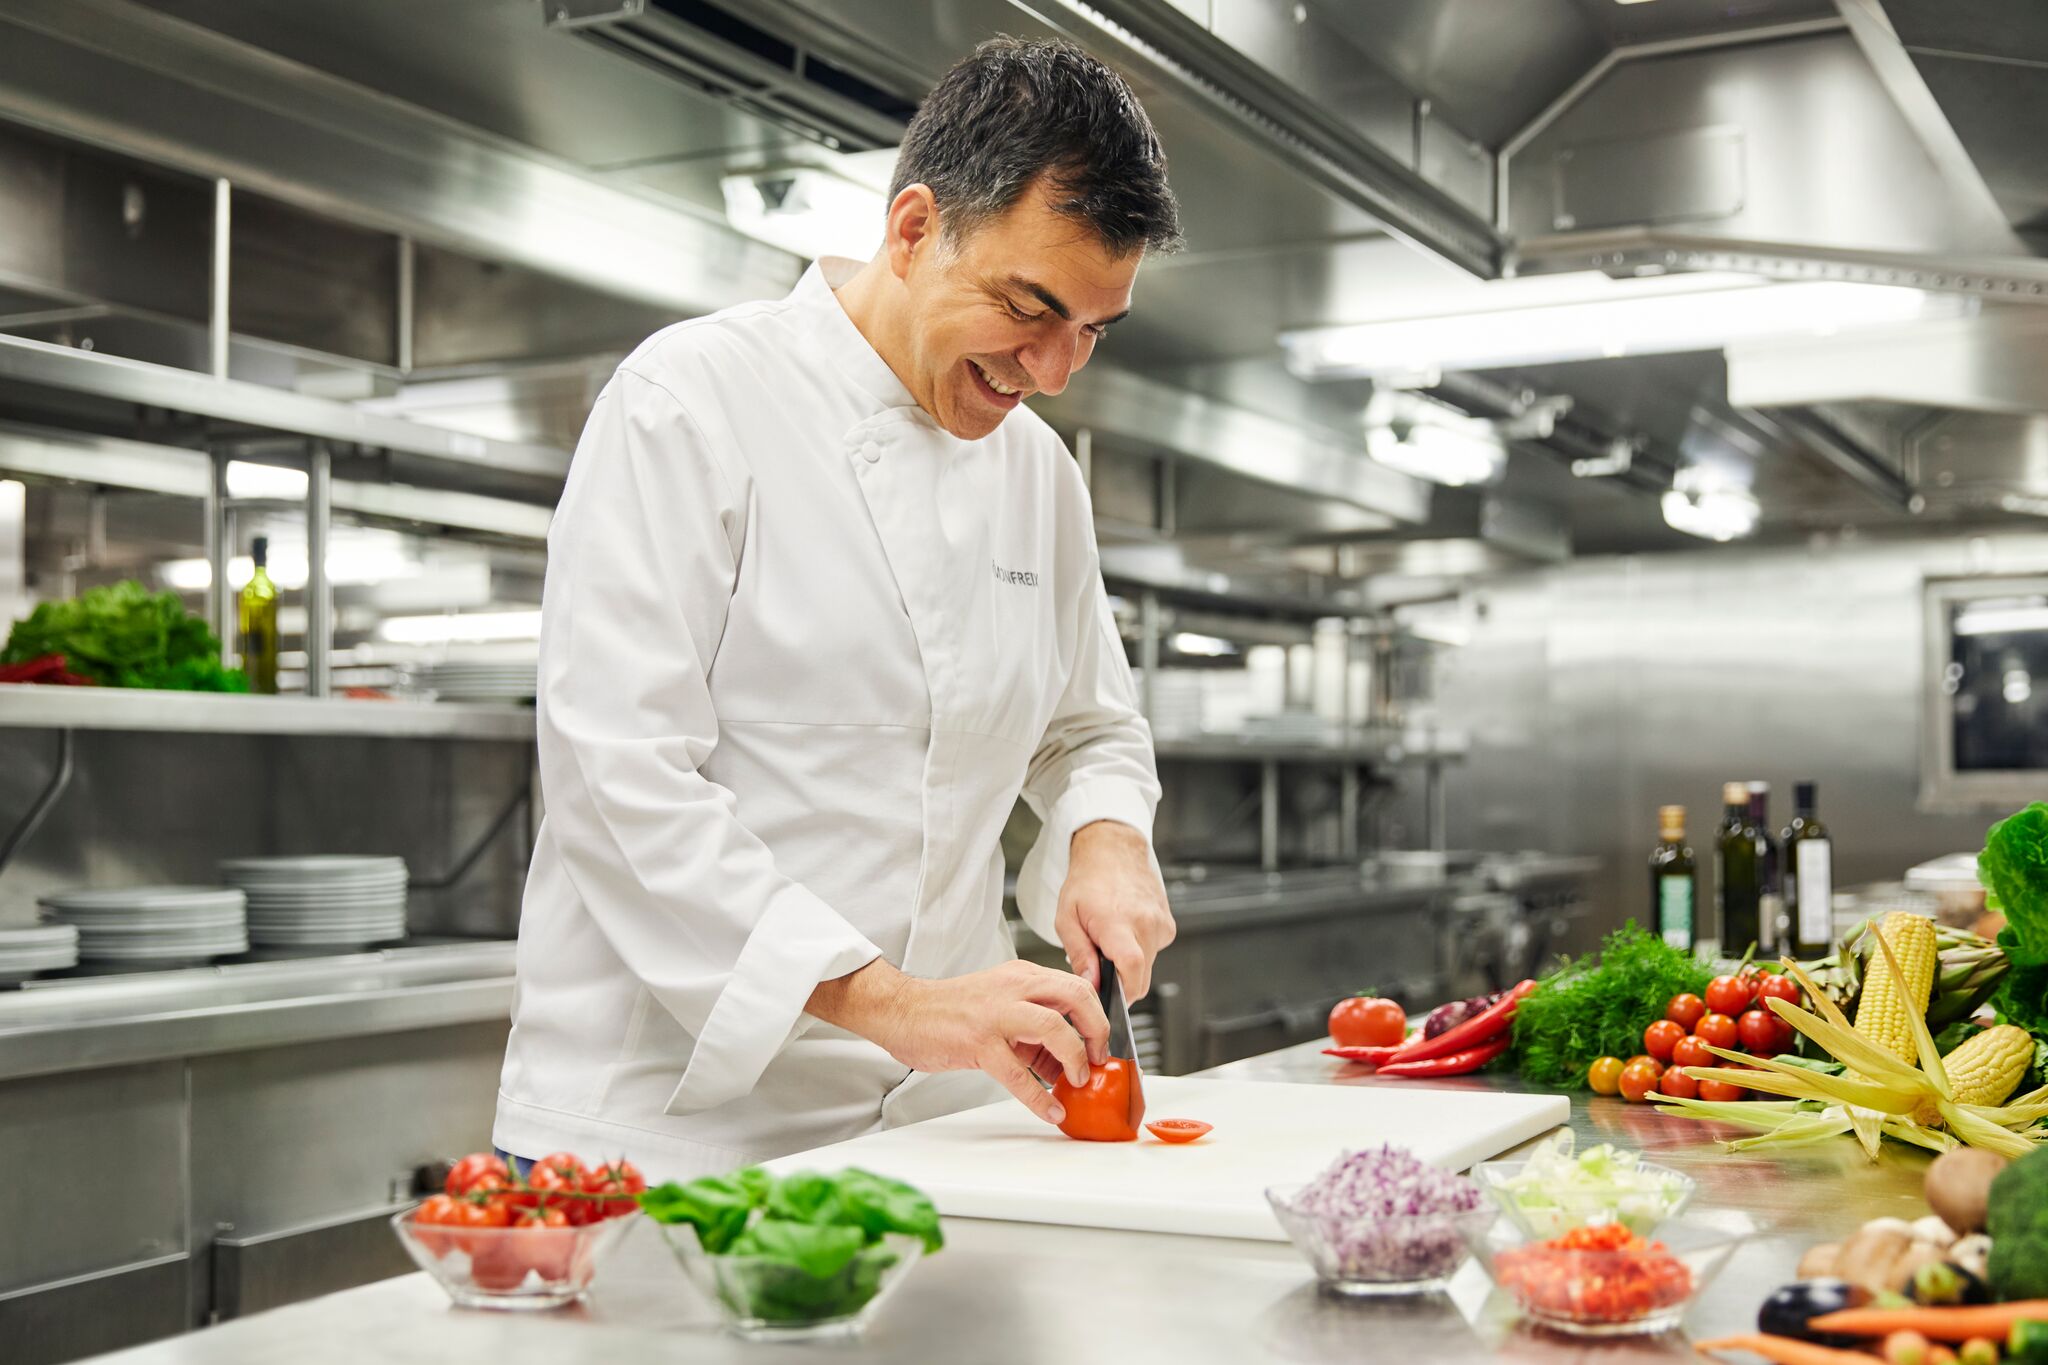 MSC Cruises adds another Michelin-Star chef to its lineup